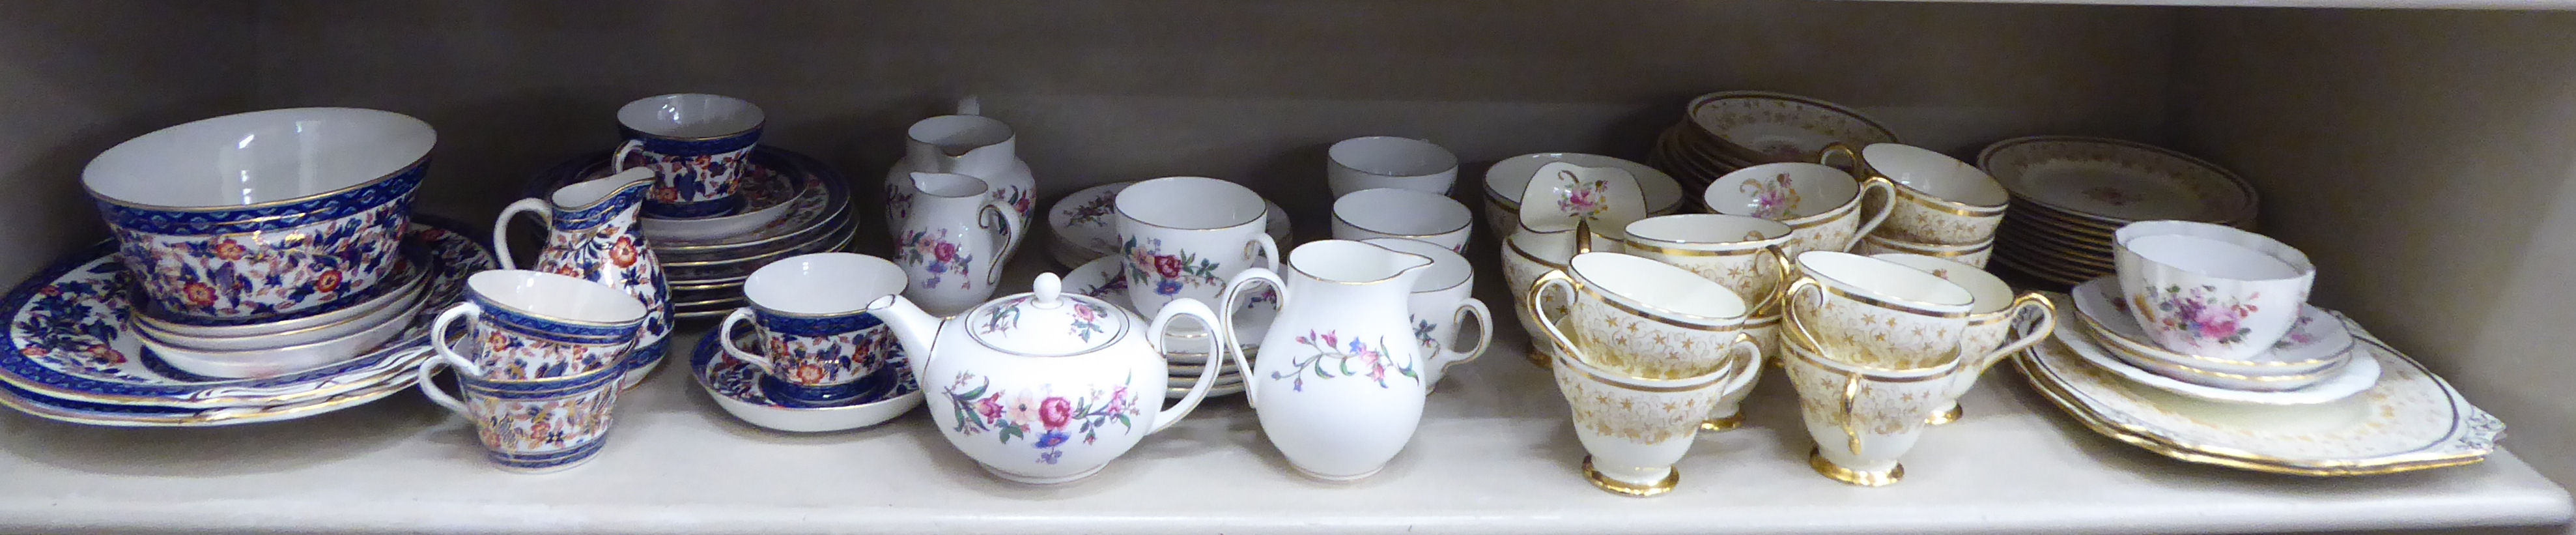 Teaware: to include Staffordshire New Chelsea and Wedgwood Devon Sprays patterns OS8